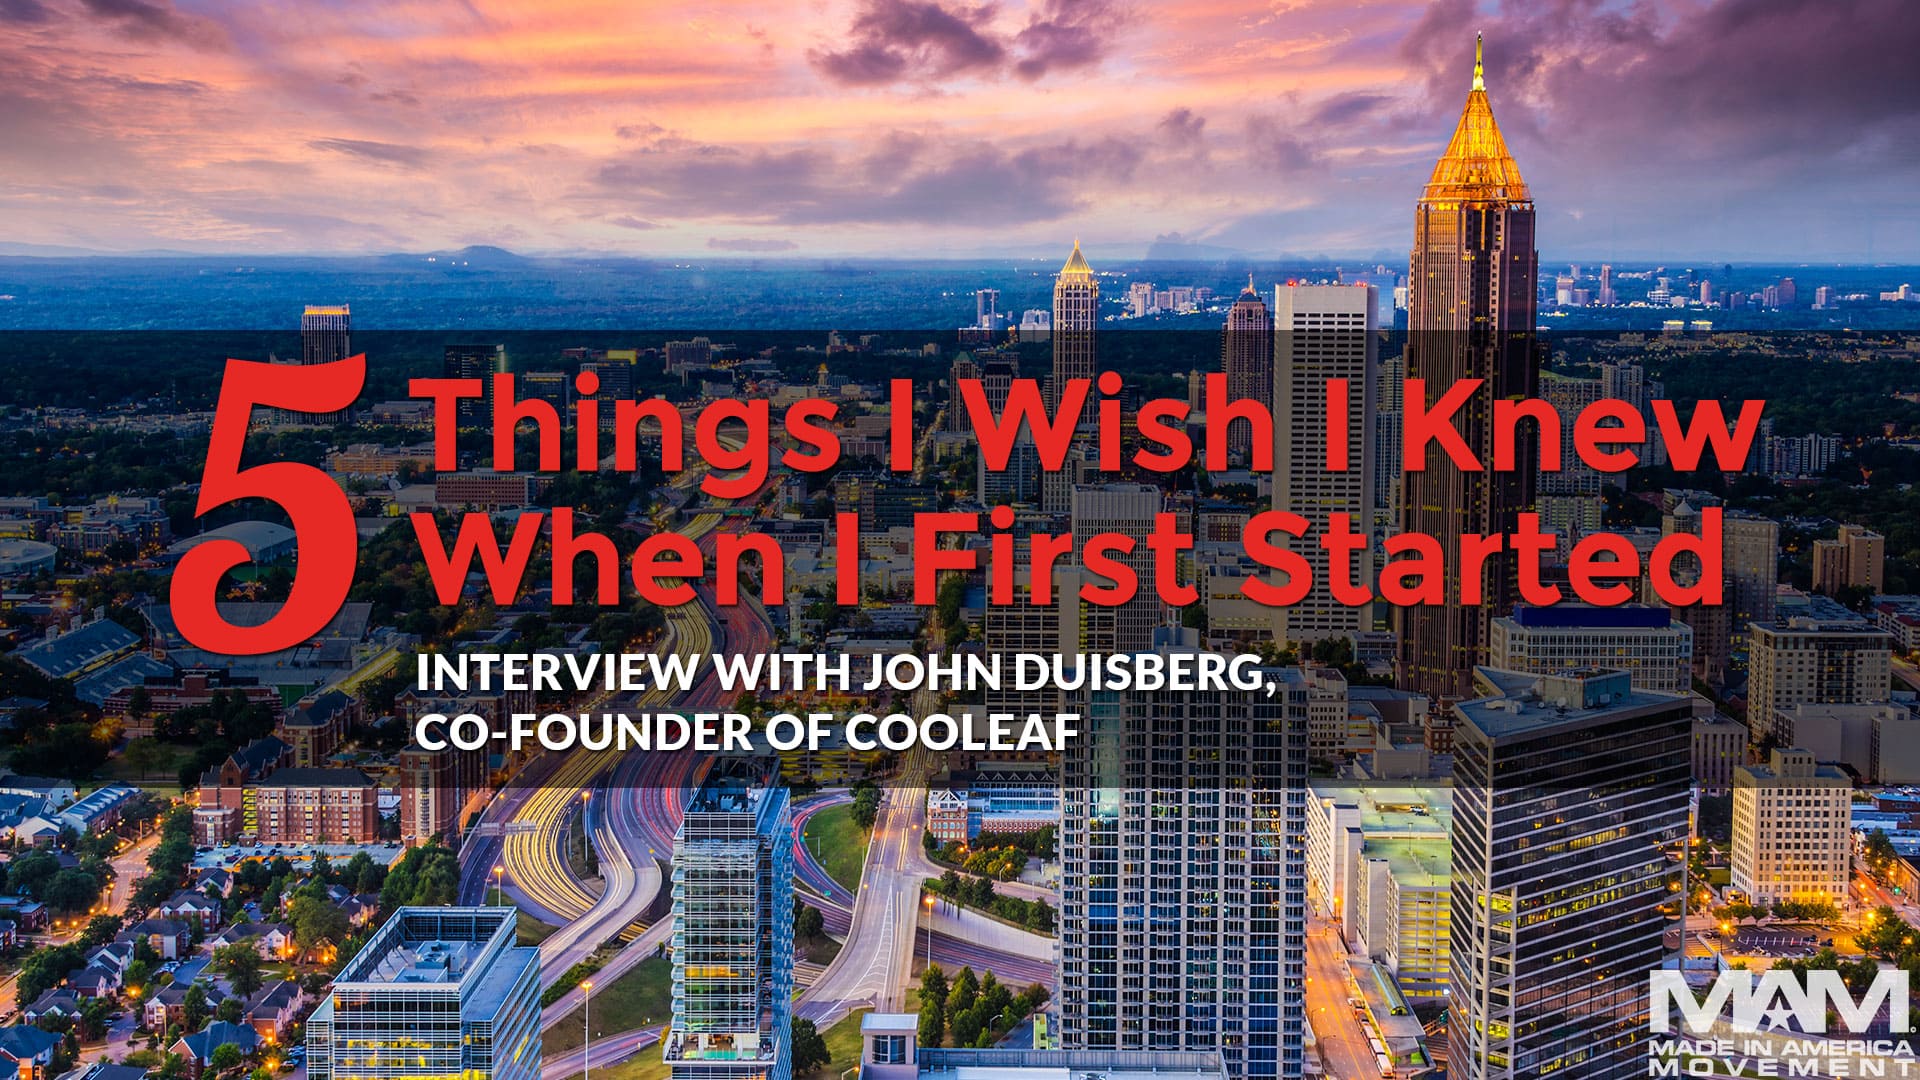 5 Things I Wish I Knew When I First Started: John Duisberg, Co-Founder of Cooleaf